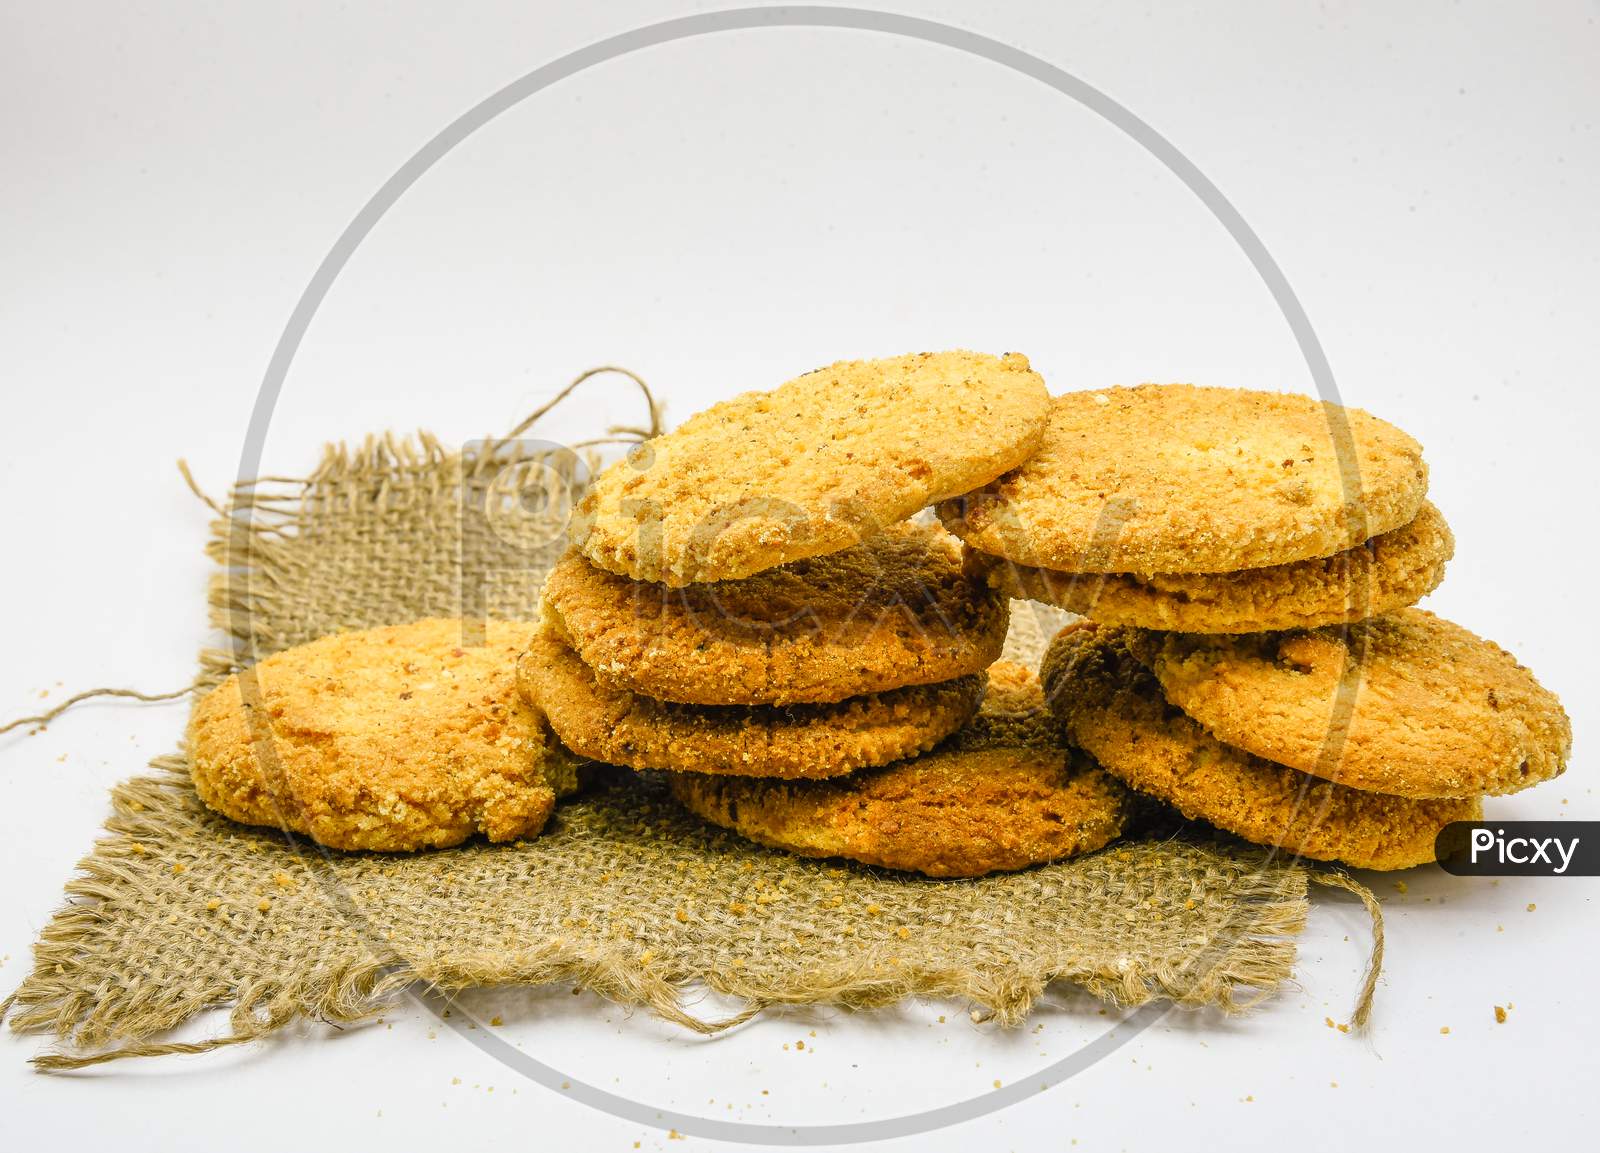 Biscuits Isolated On White Background.Atta Biscuit, Cookies, White Flour Biscuit - Indian Cooking